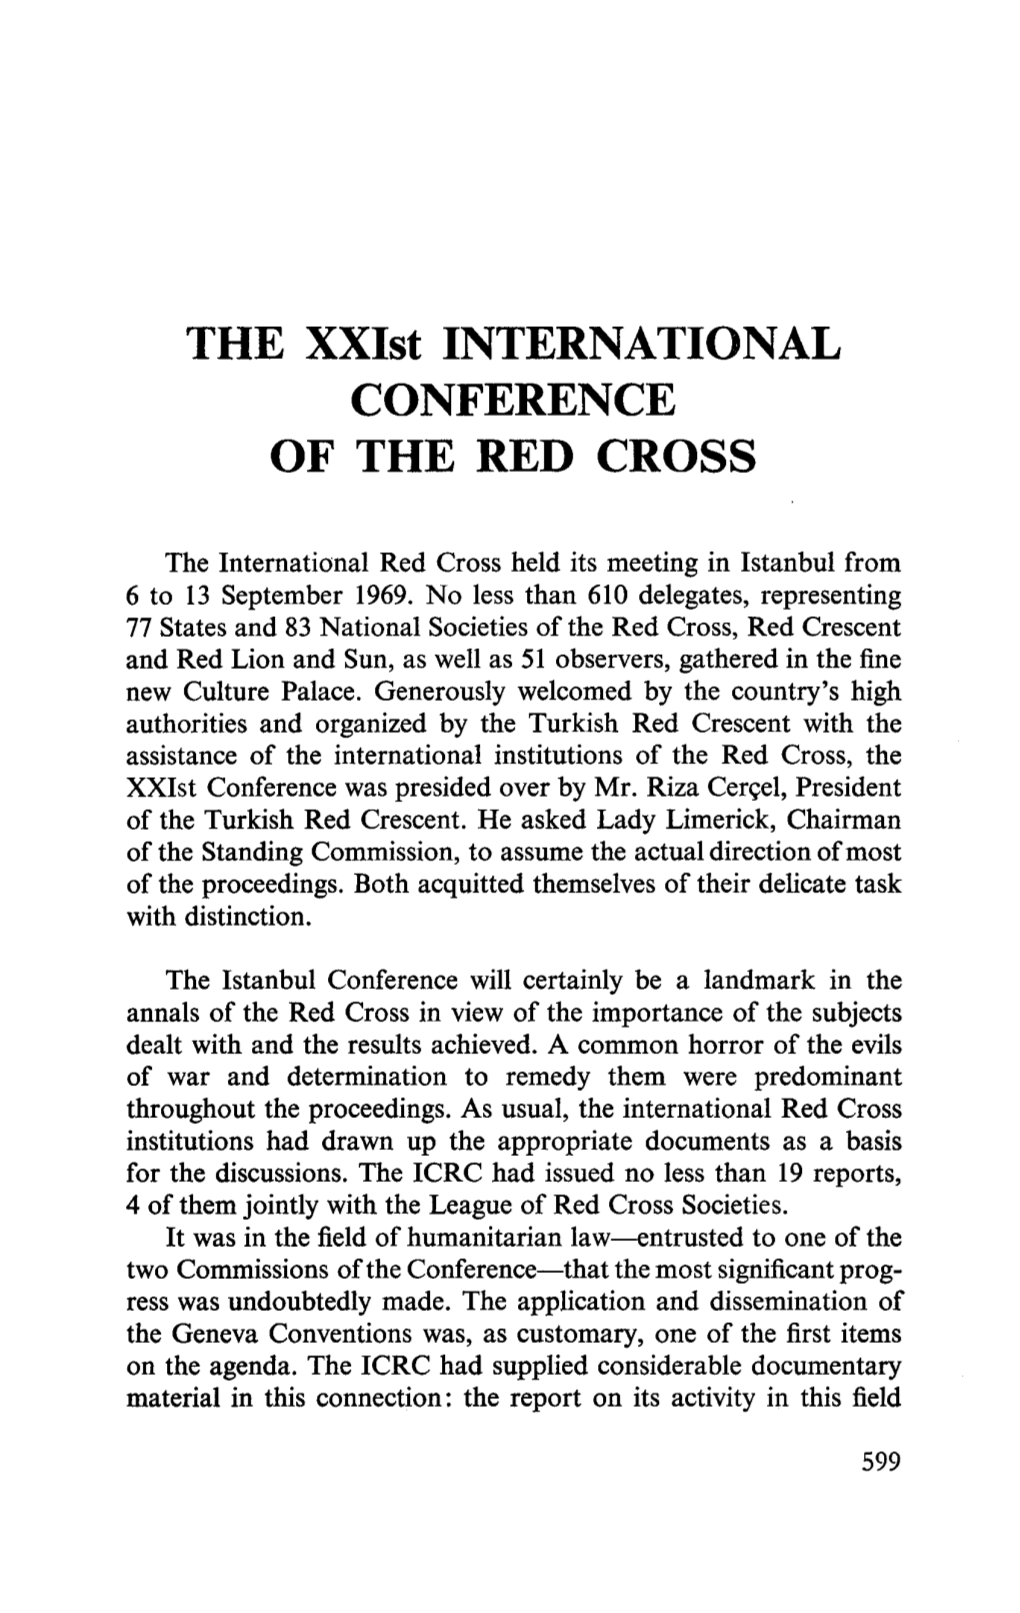 THE Xxist INTERNATIONAL CONFERENCE of the RED CROSS